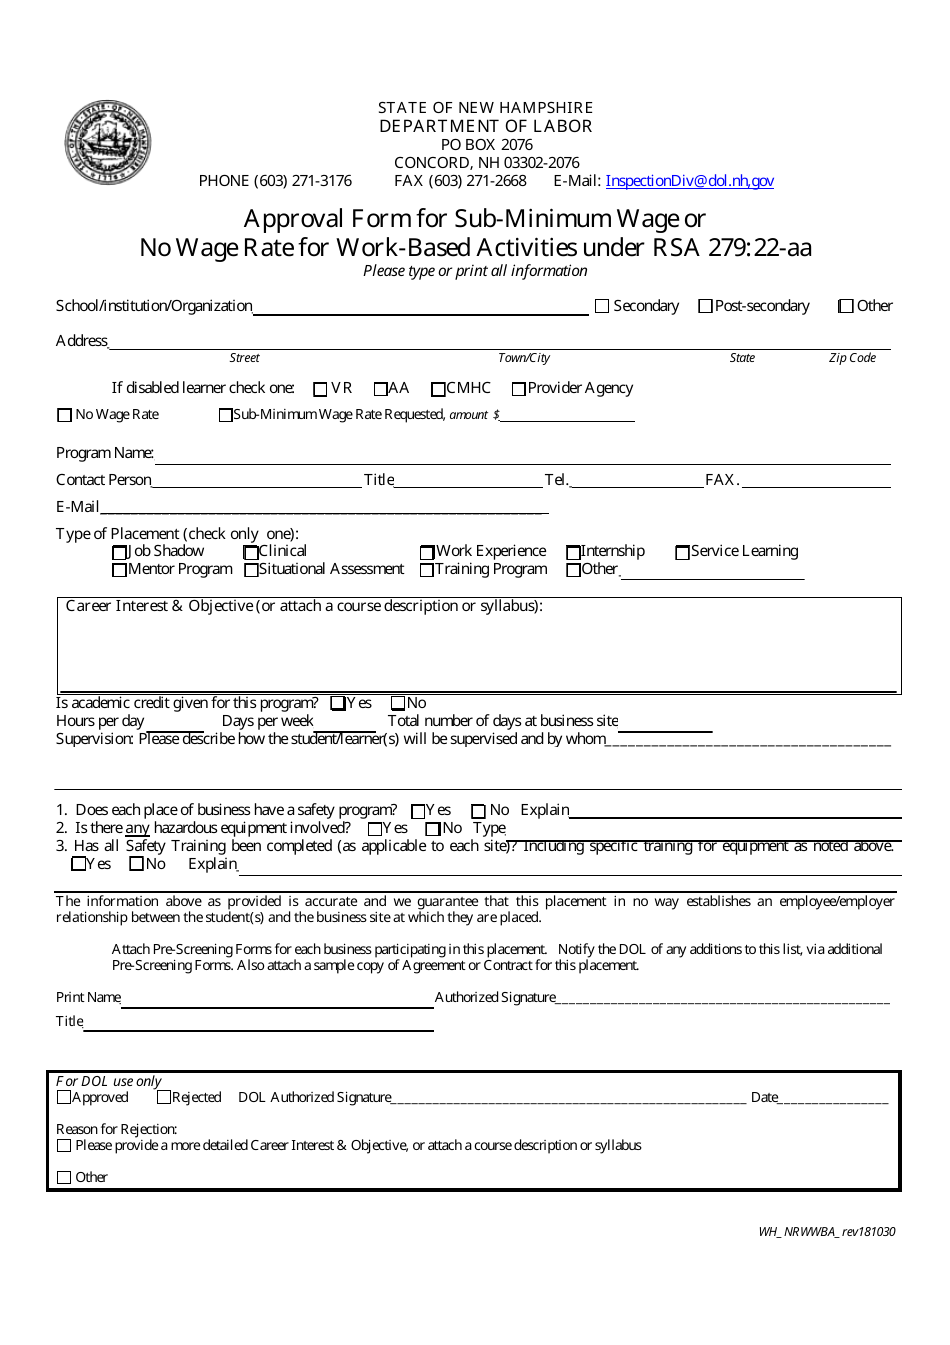 Approval Form for Sub-minimum Wage or No Wage Rate for Work-Based Activities Under Rsa 279:22-aa - New Hampshire, Page 1